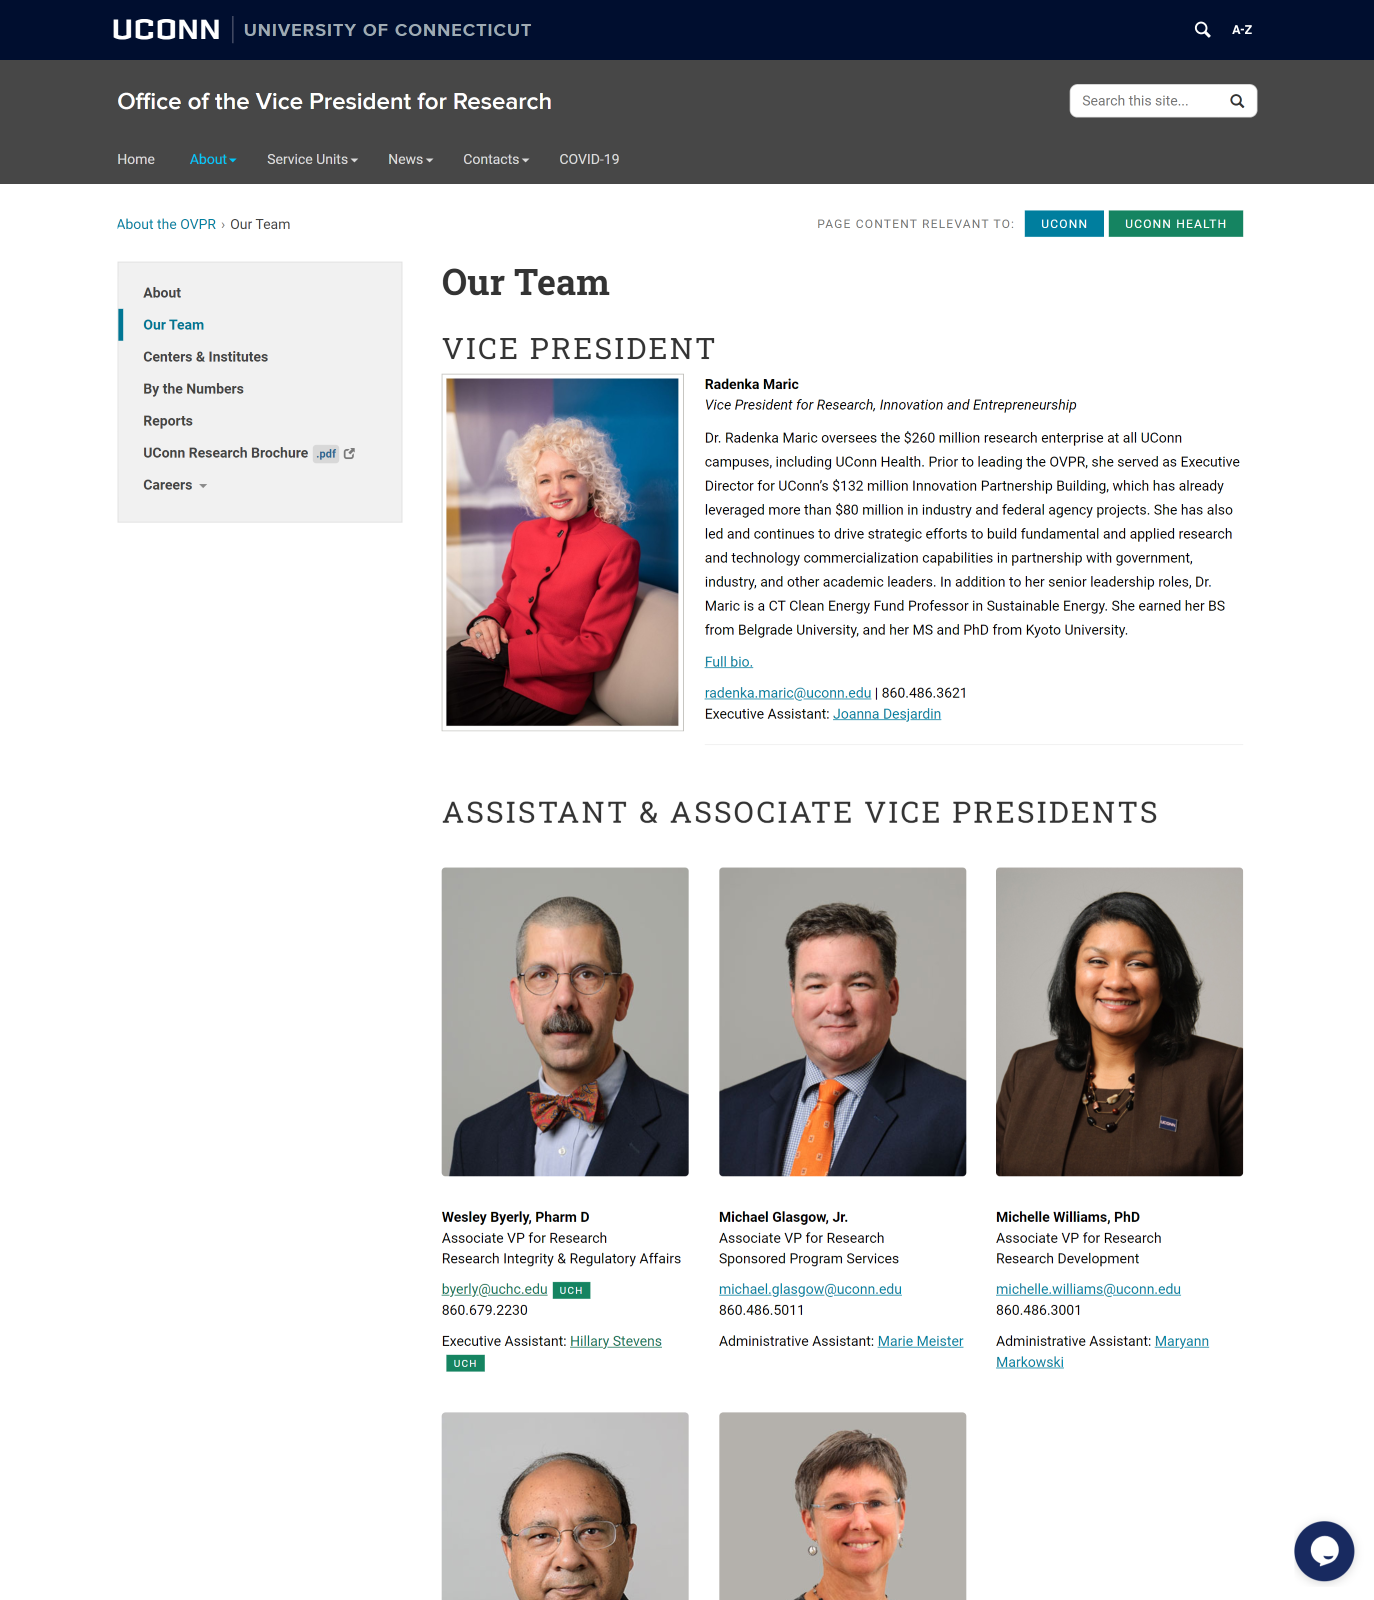 Screenshot of an interior page of the Office of the Vice President for Research website